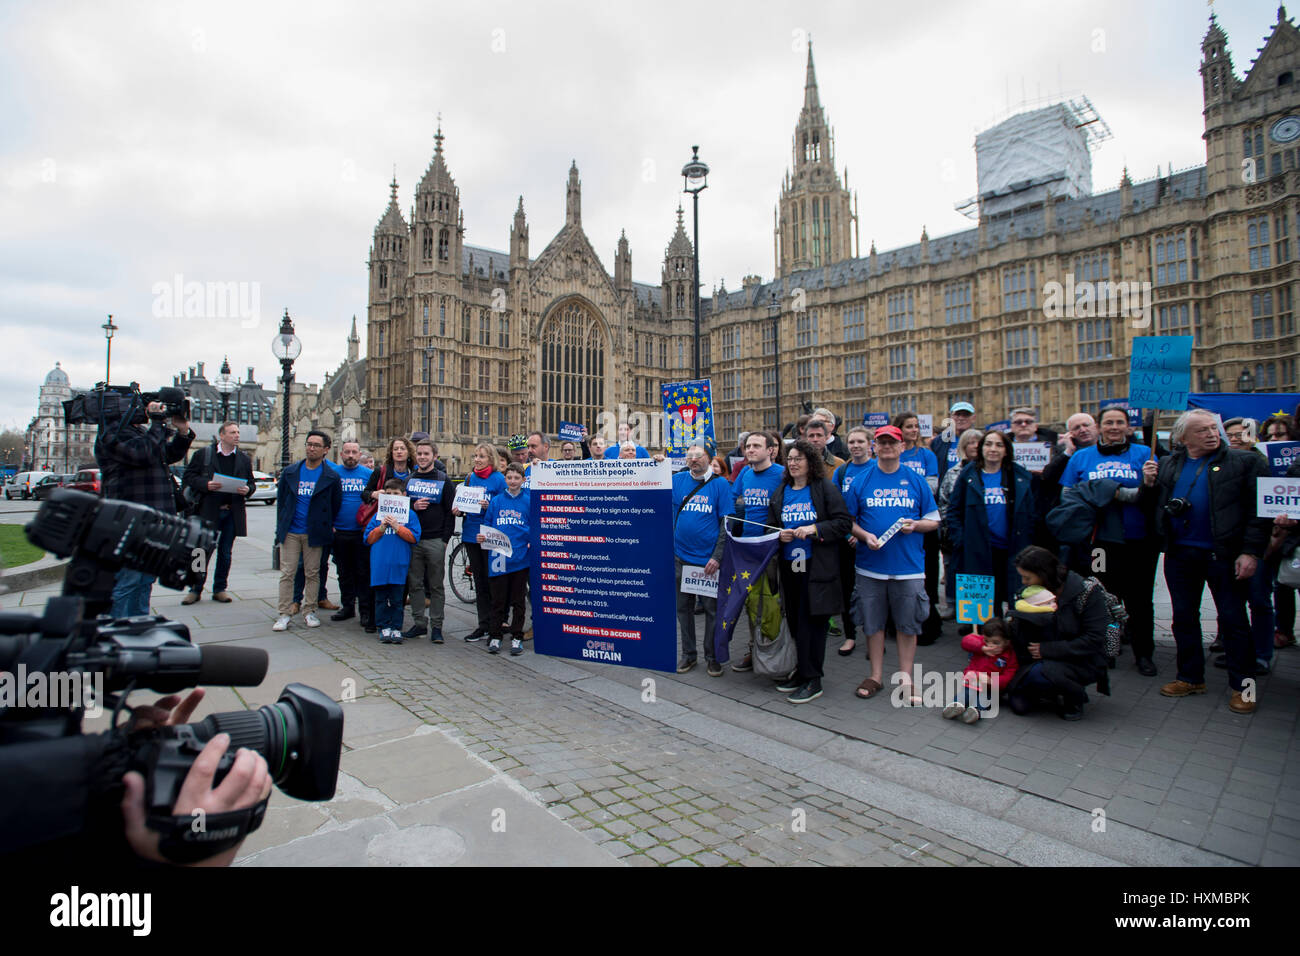 People from Open Britain, which campaigns for a soft Brexit in Parliament Square, London after the Prime Minister Theresa May signed a letter to trigger Article 50 that starts the formal exit process by the UK from the European Union. Stock Photo